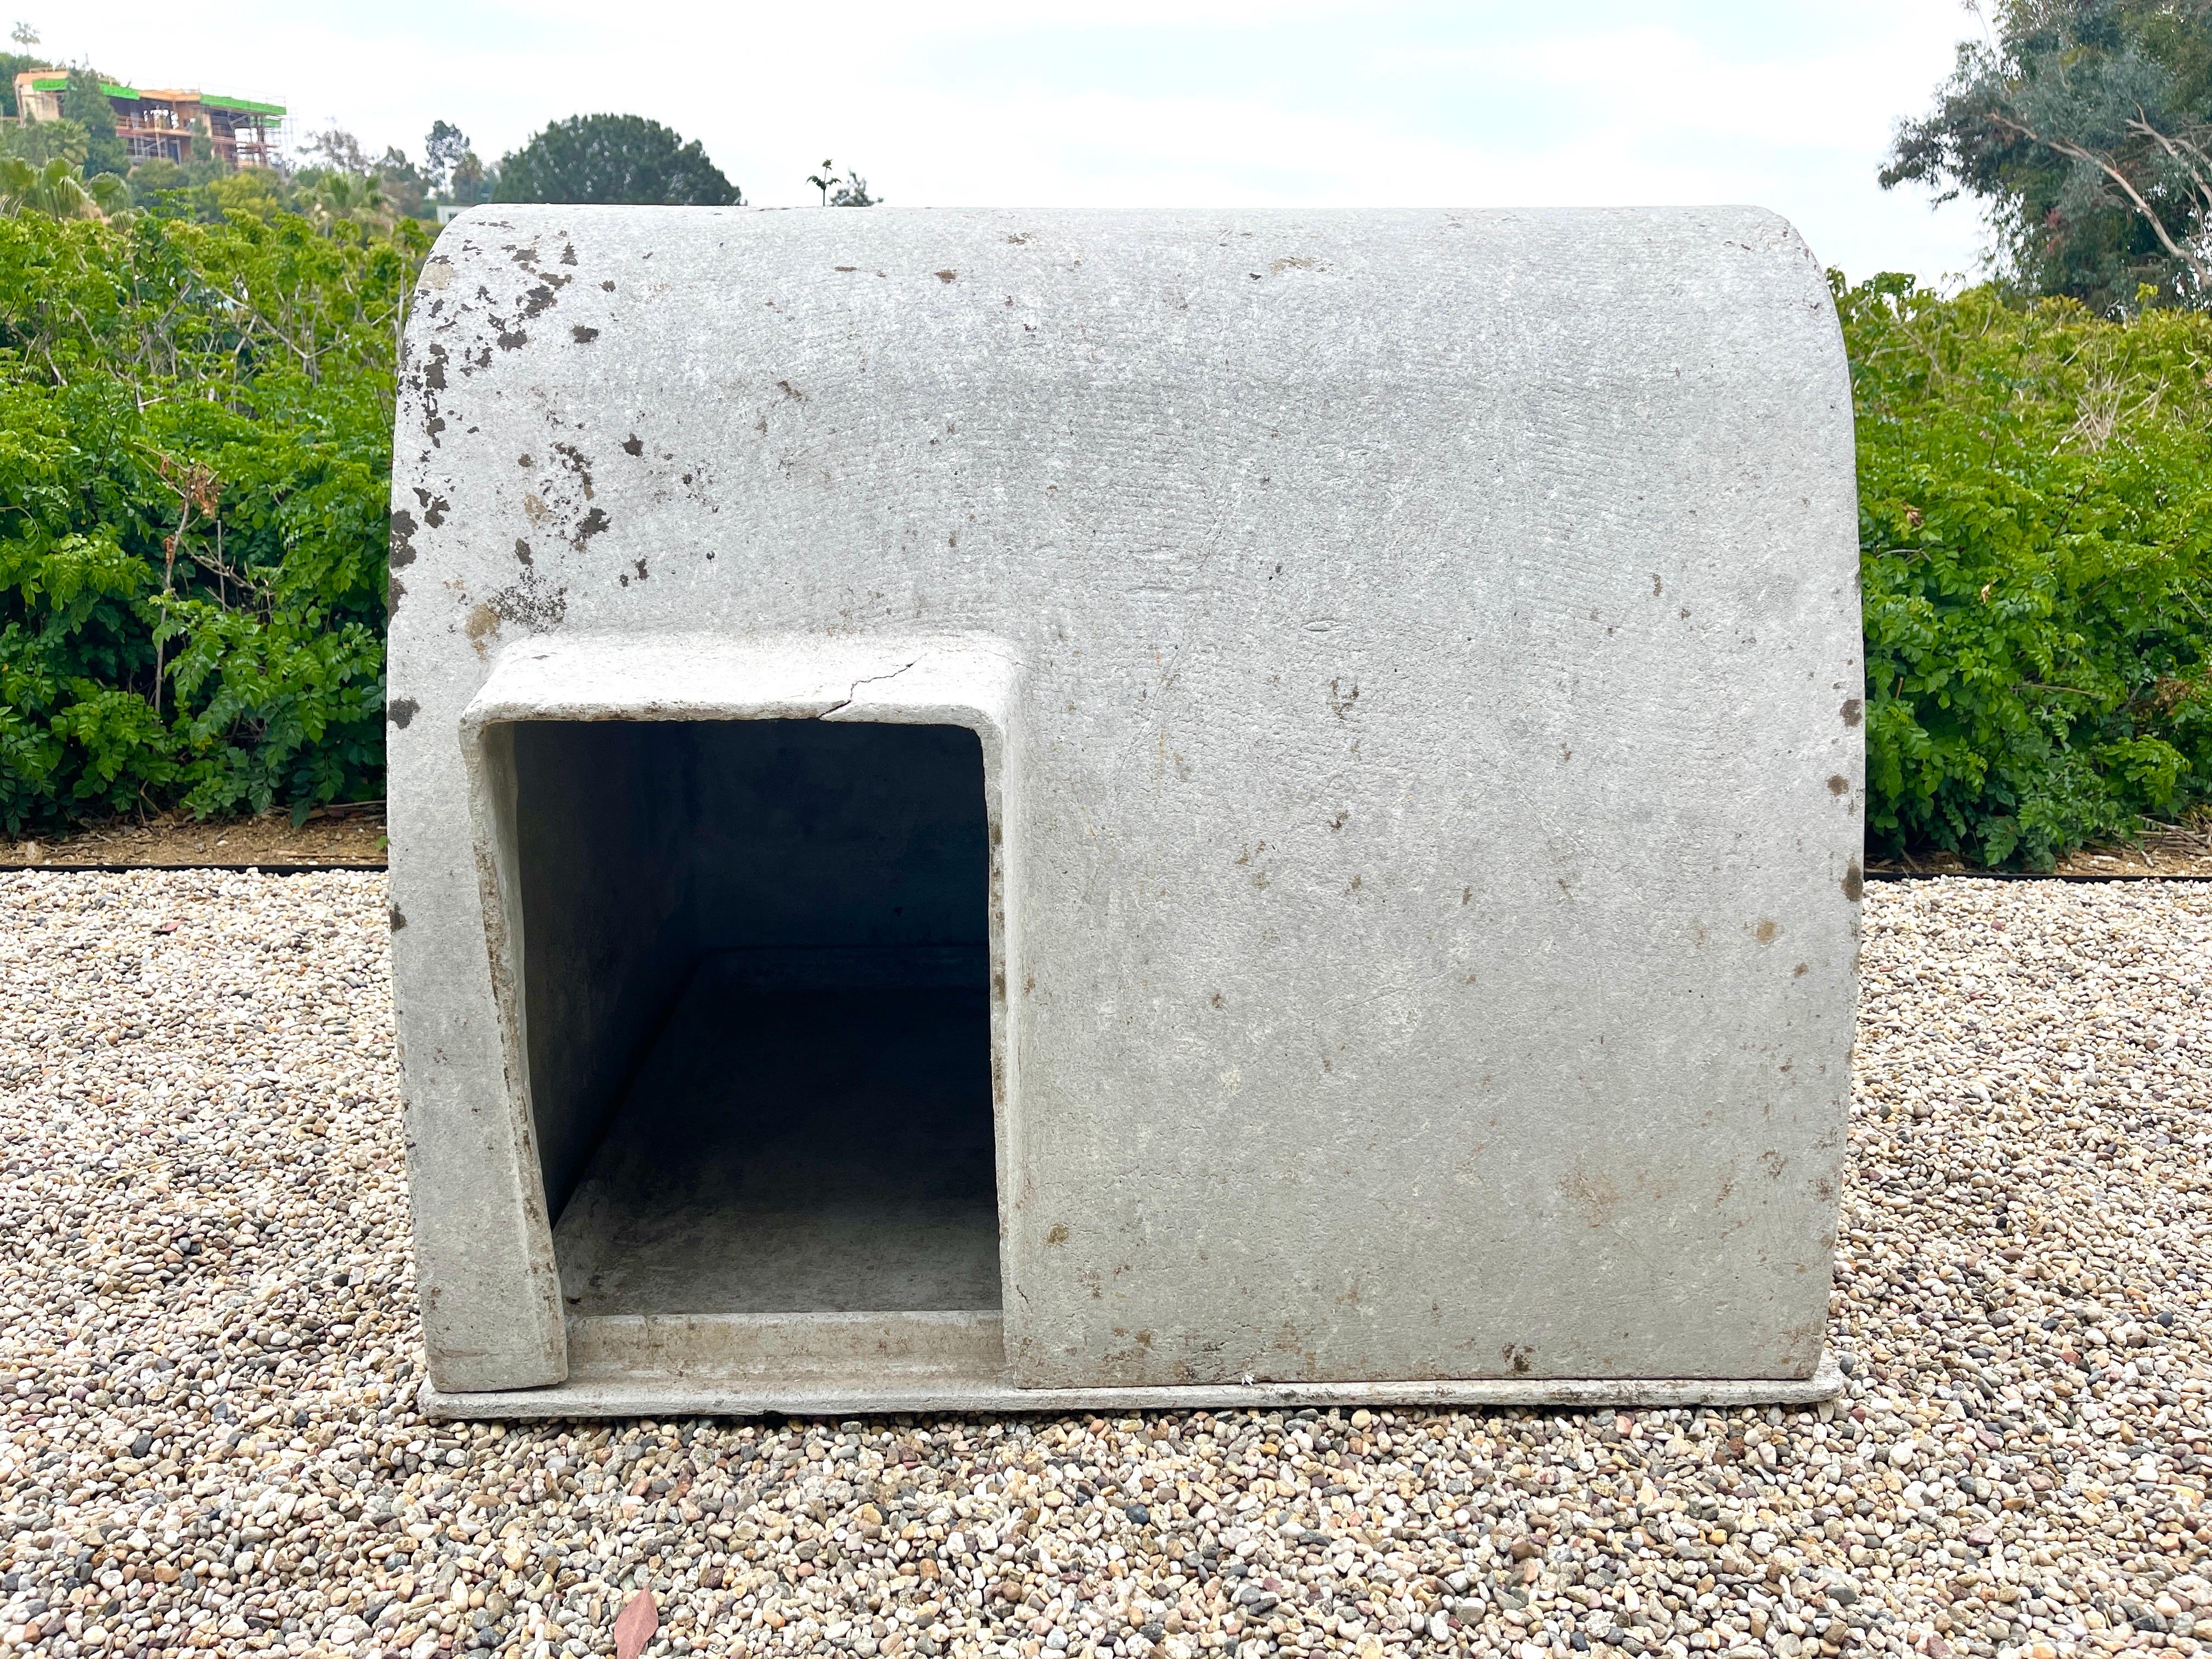 Fantastic concrete dome shaped dog house designed by Willy Guhl for Eternit. Wonderful patina and shape would be a perfect kennel for your beloved mid-century pet!